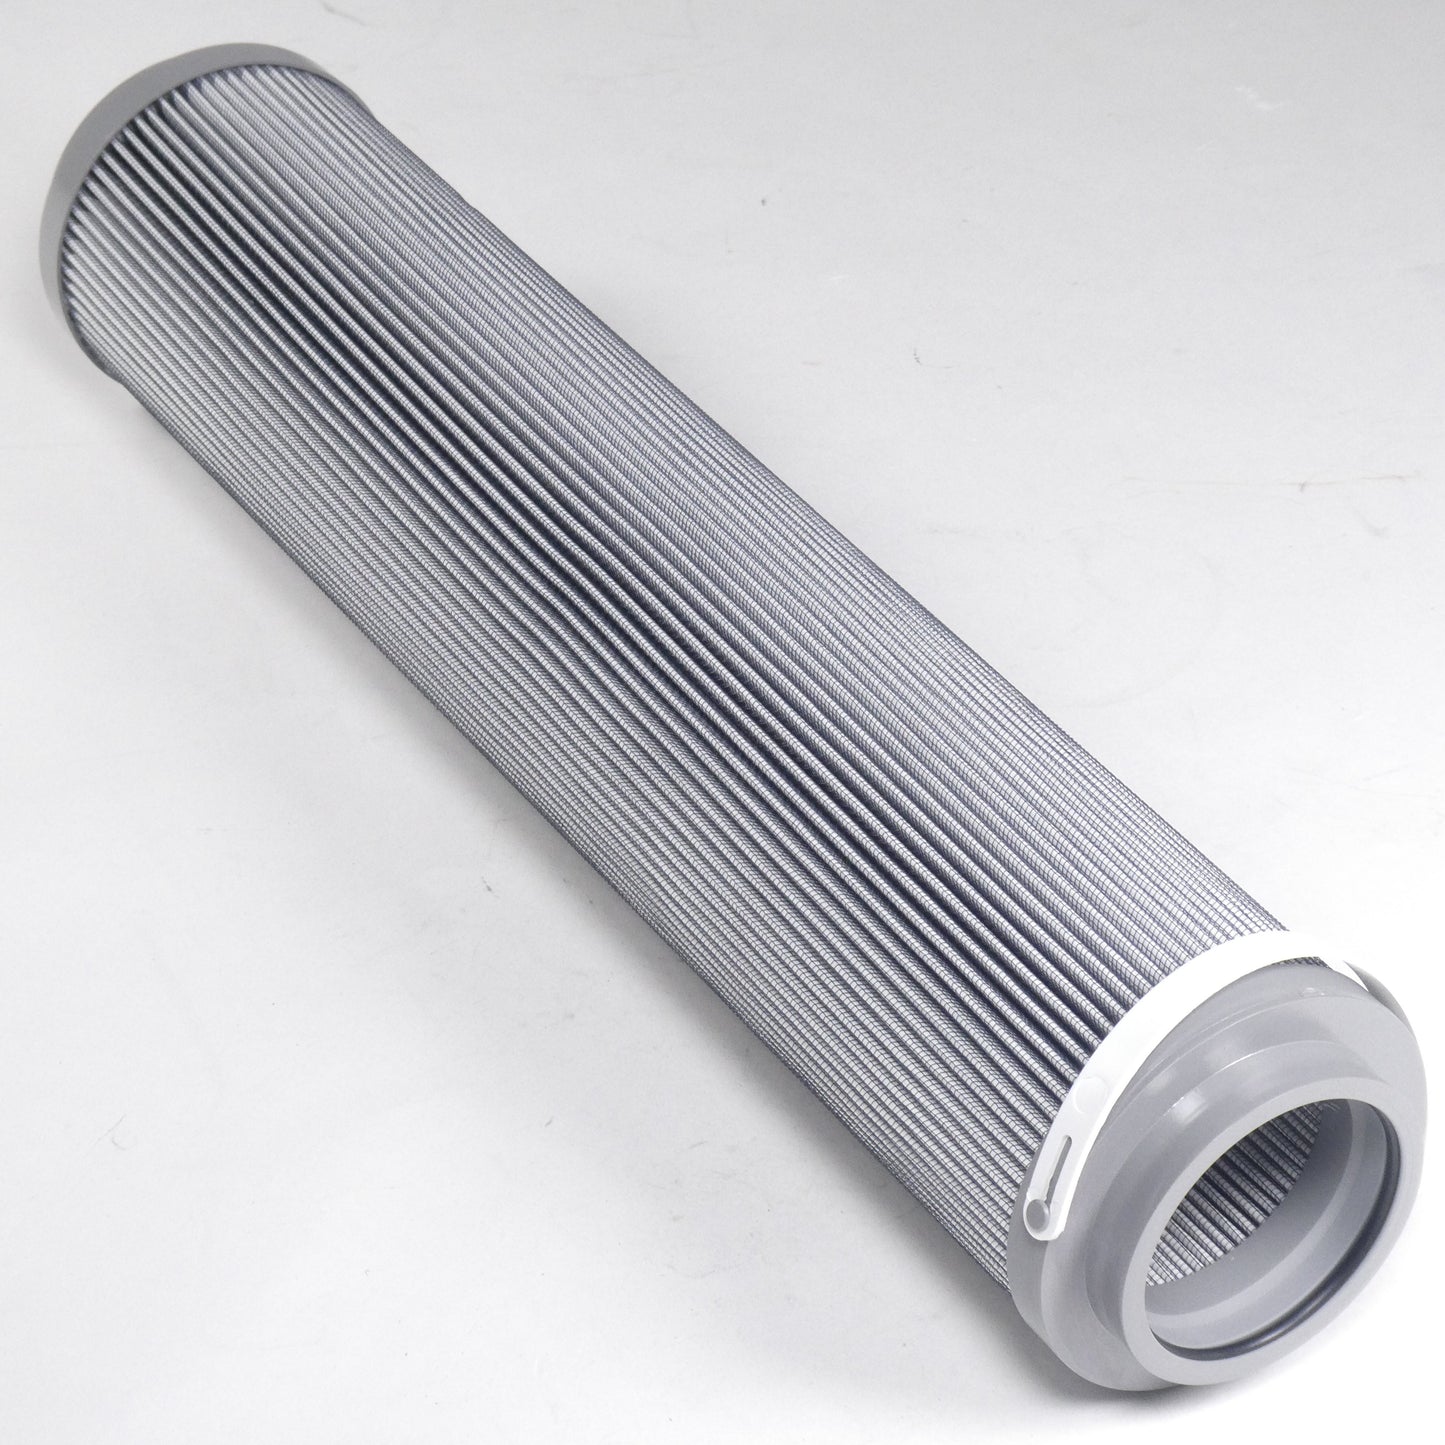 Hydrafil Replacement Filter Element for Pall HC2544FMT19H